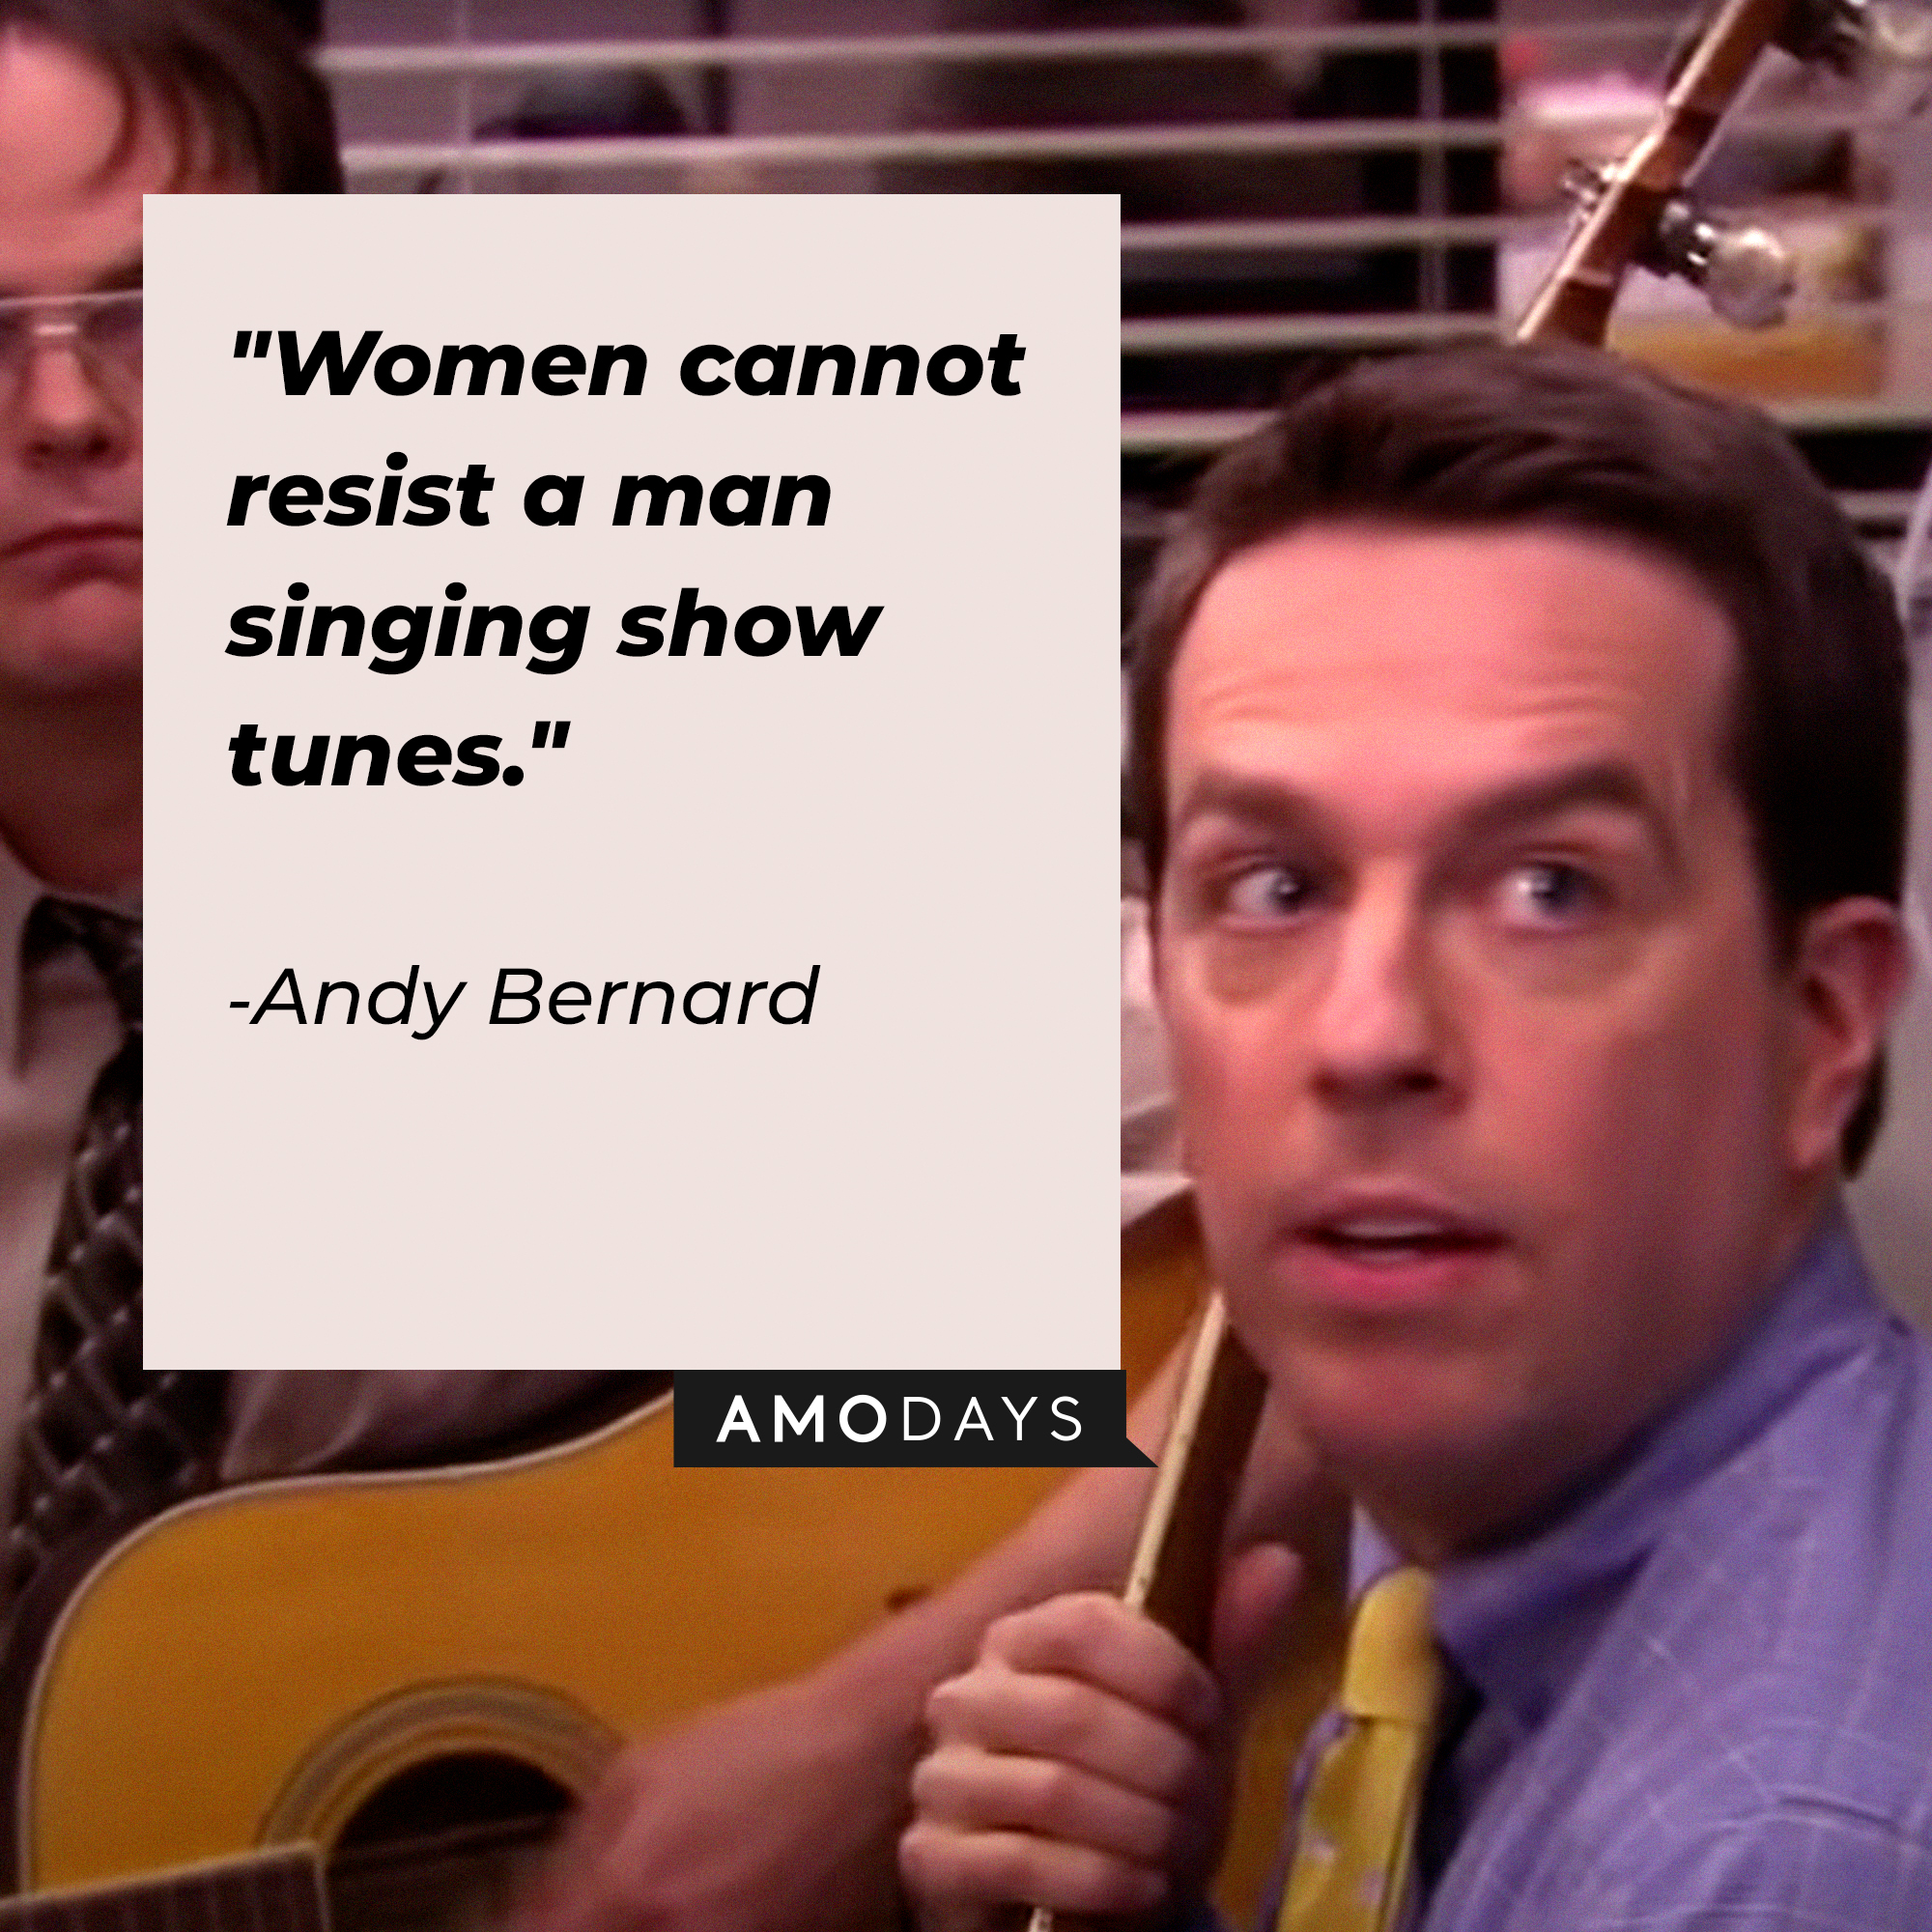 Andy Bernard, with his quote: “Women cannot resist a man singing show tunes.”│ Source: youtube.com/TheOffice